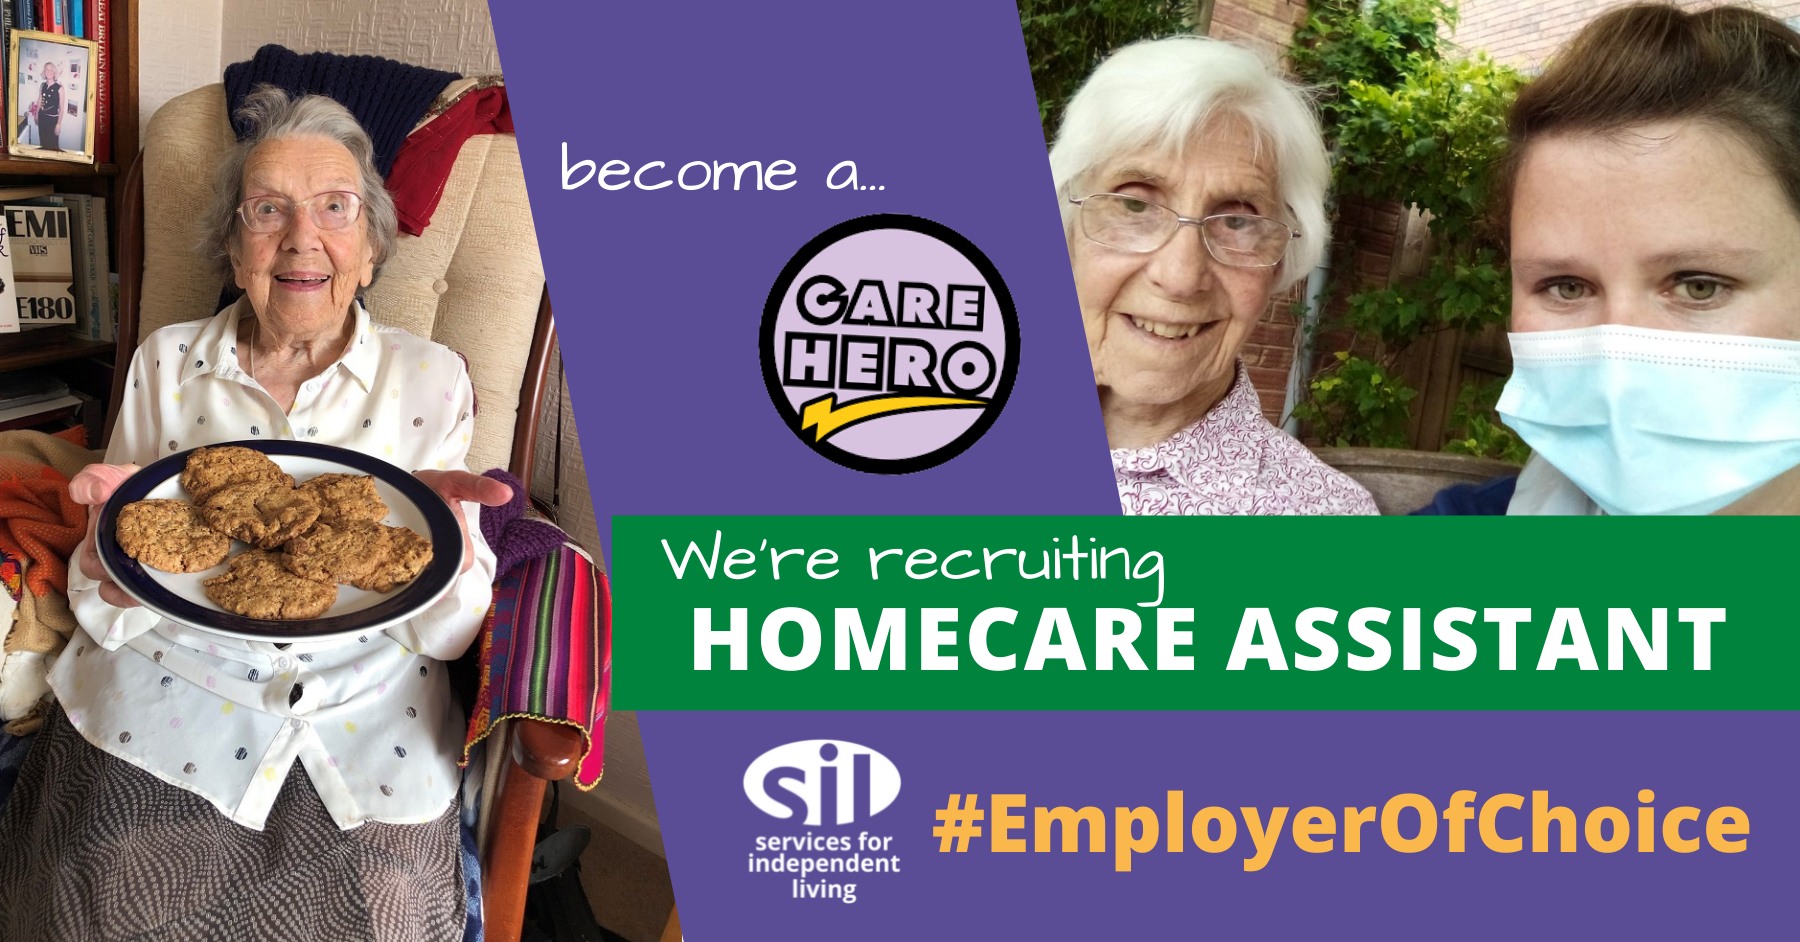 services for independent living homecare assistant job advert image